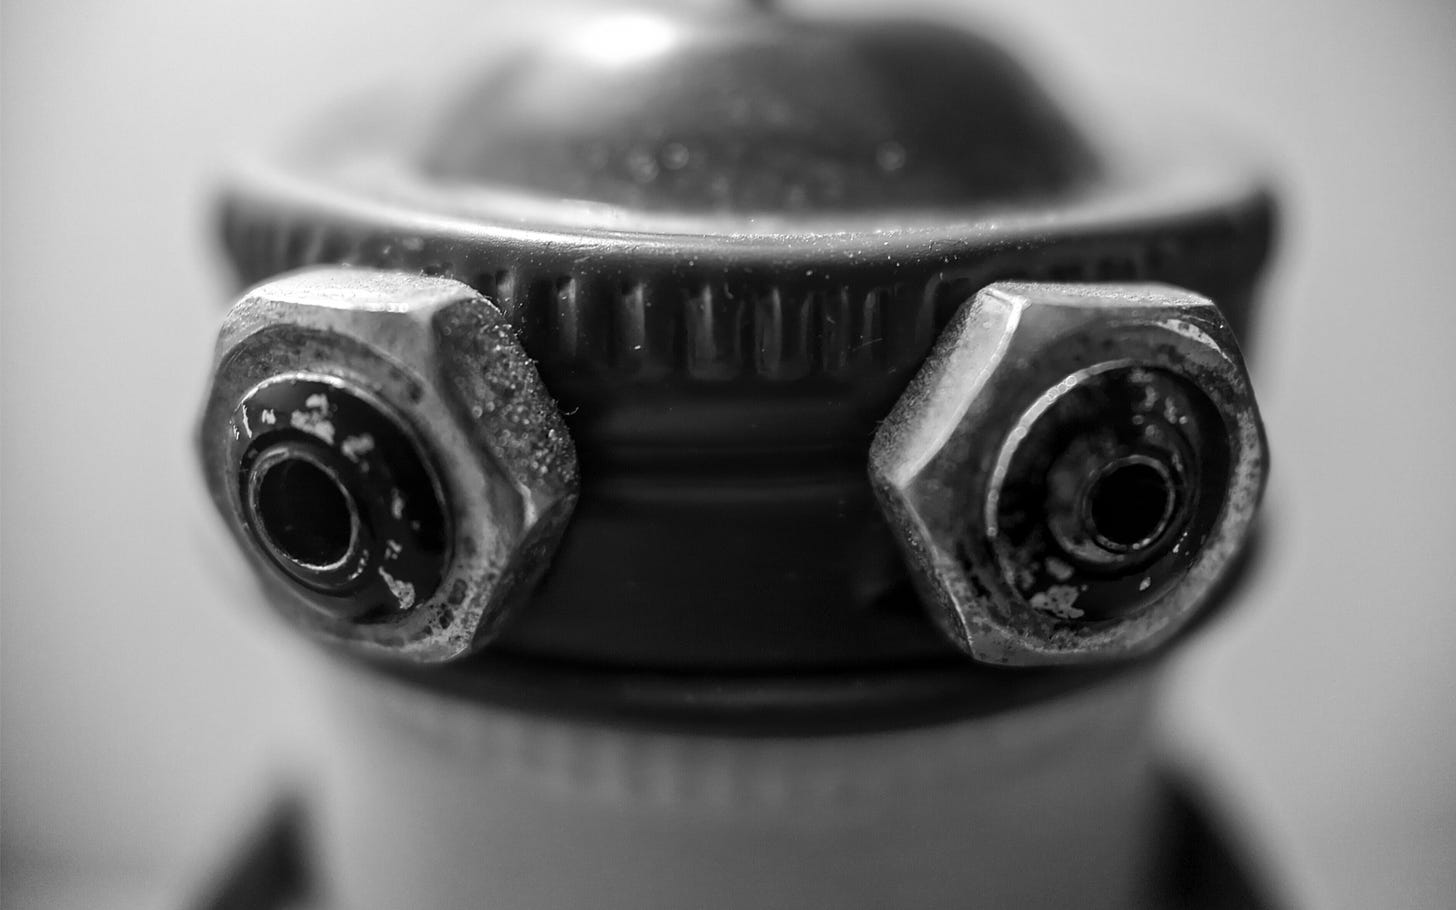 Macro shot of the metal nuts that serve as a tiny metal roboto's eyes